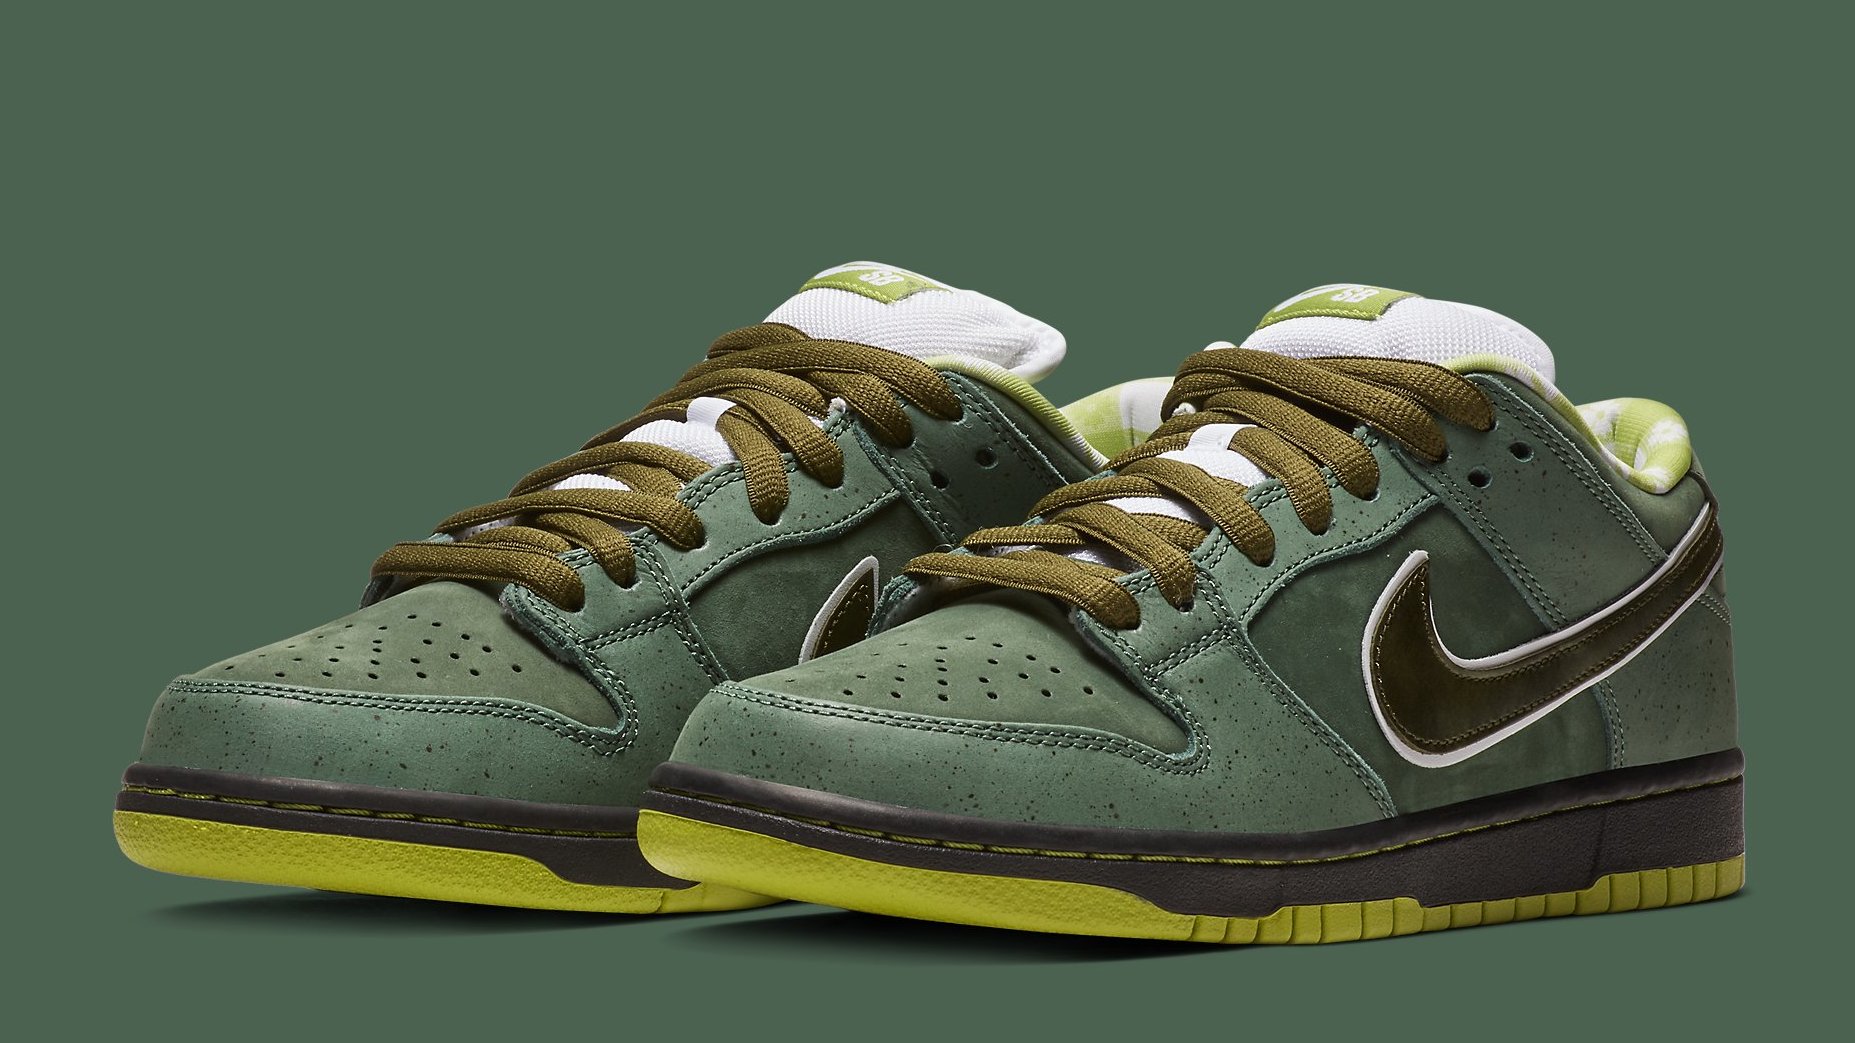 Borde administración viudo CNCPTS x Nike SB Dunk Low 'Green Lobster' Release Date | Sole Collector